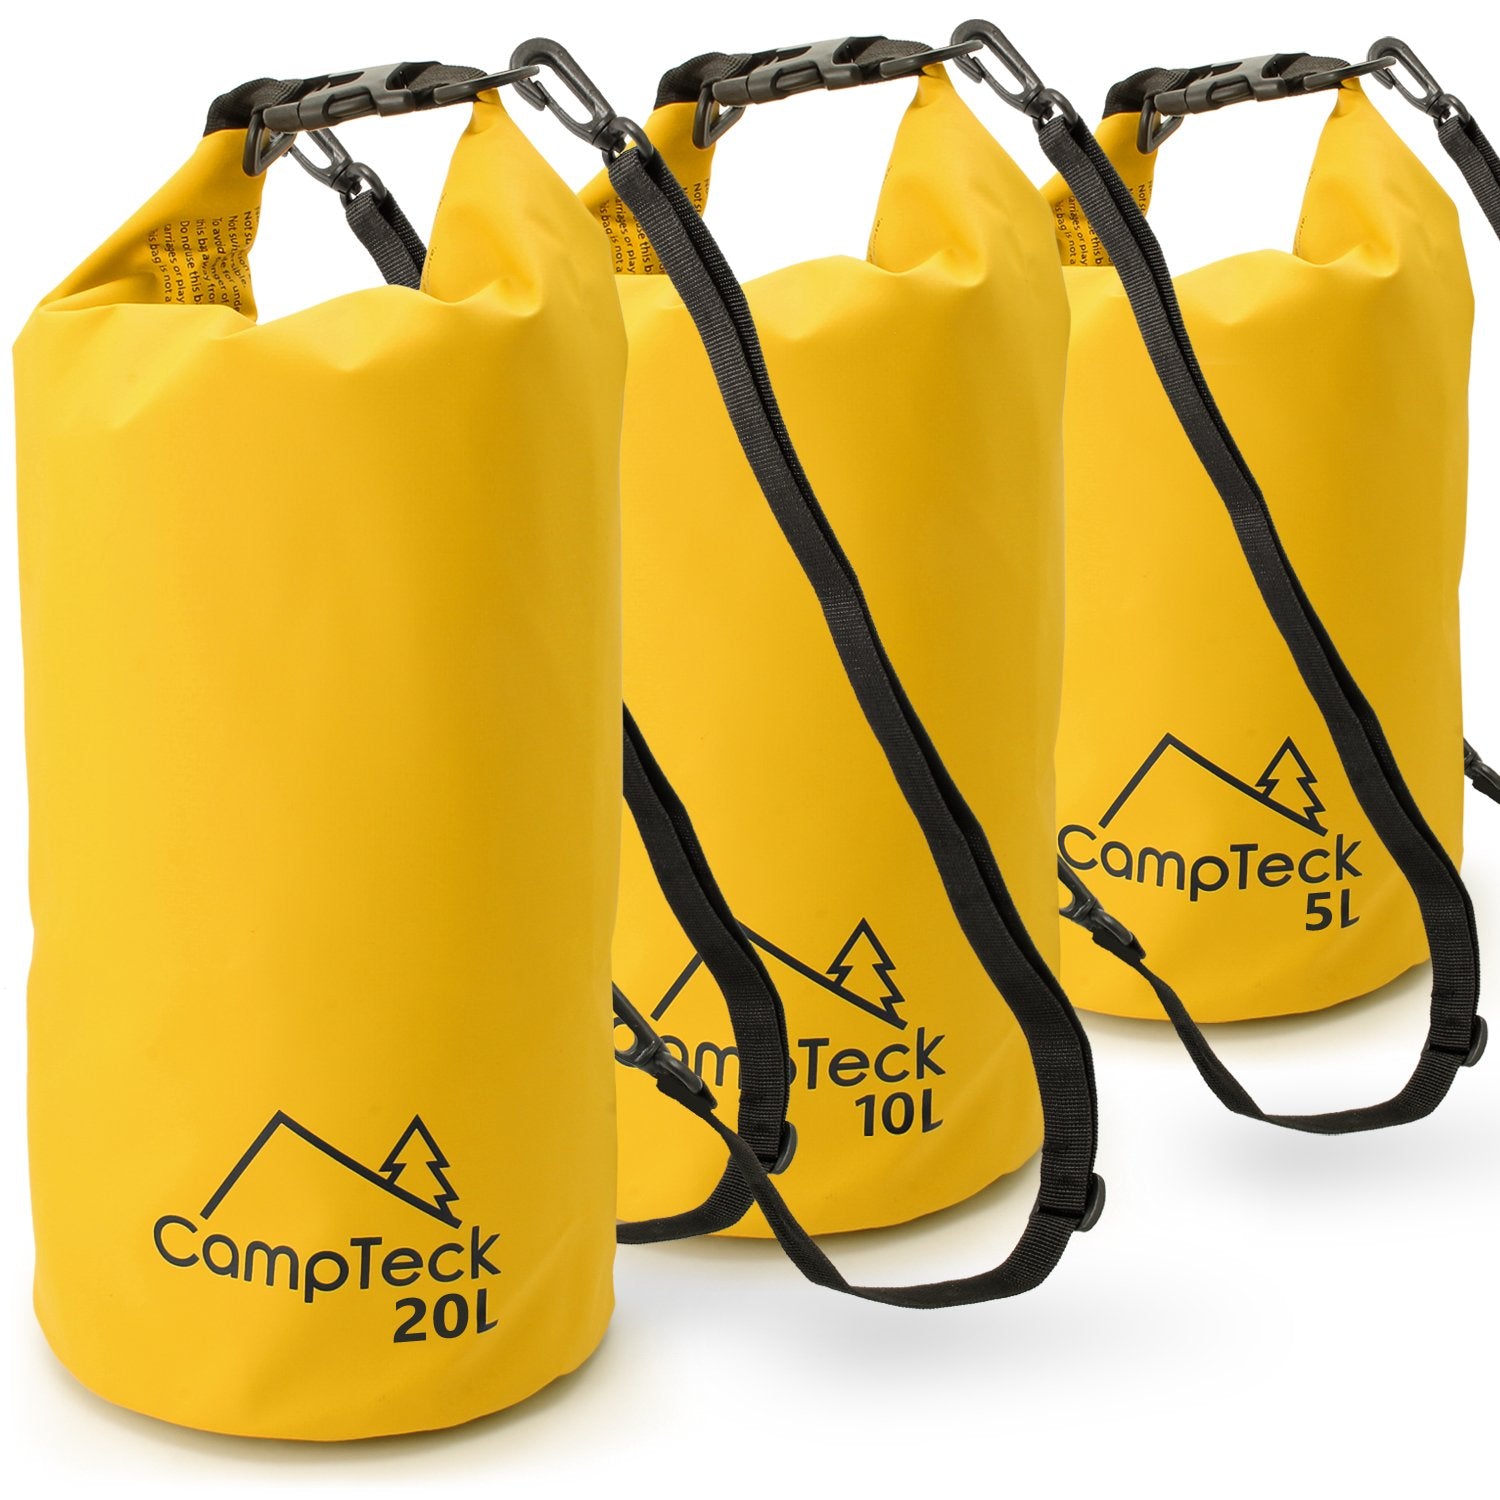 CampTeck 5L, 10L & 20L Dry Sack Waterproof Floating Storage Dry Bag for Camping, Rafting, Fishing, Canoeing, Boating, Kayaking, Snowboarding, Swimming, Diving etc. – Yellow